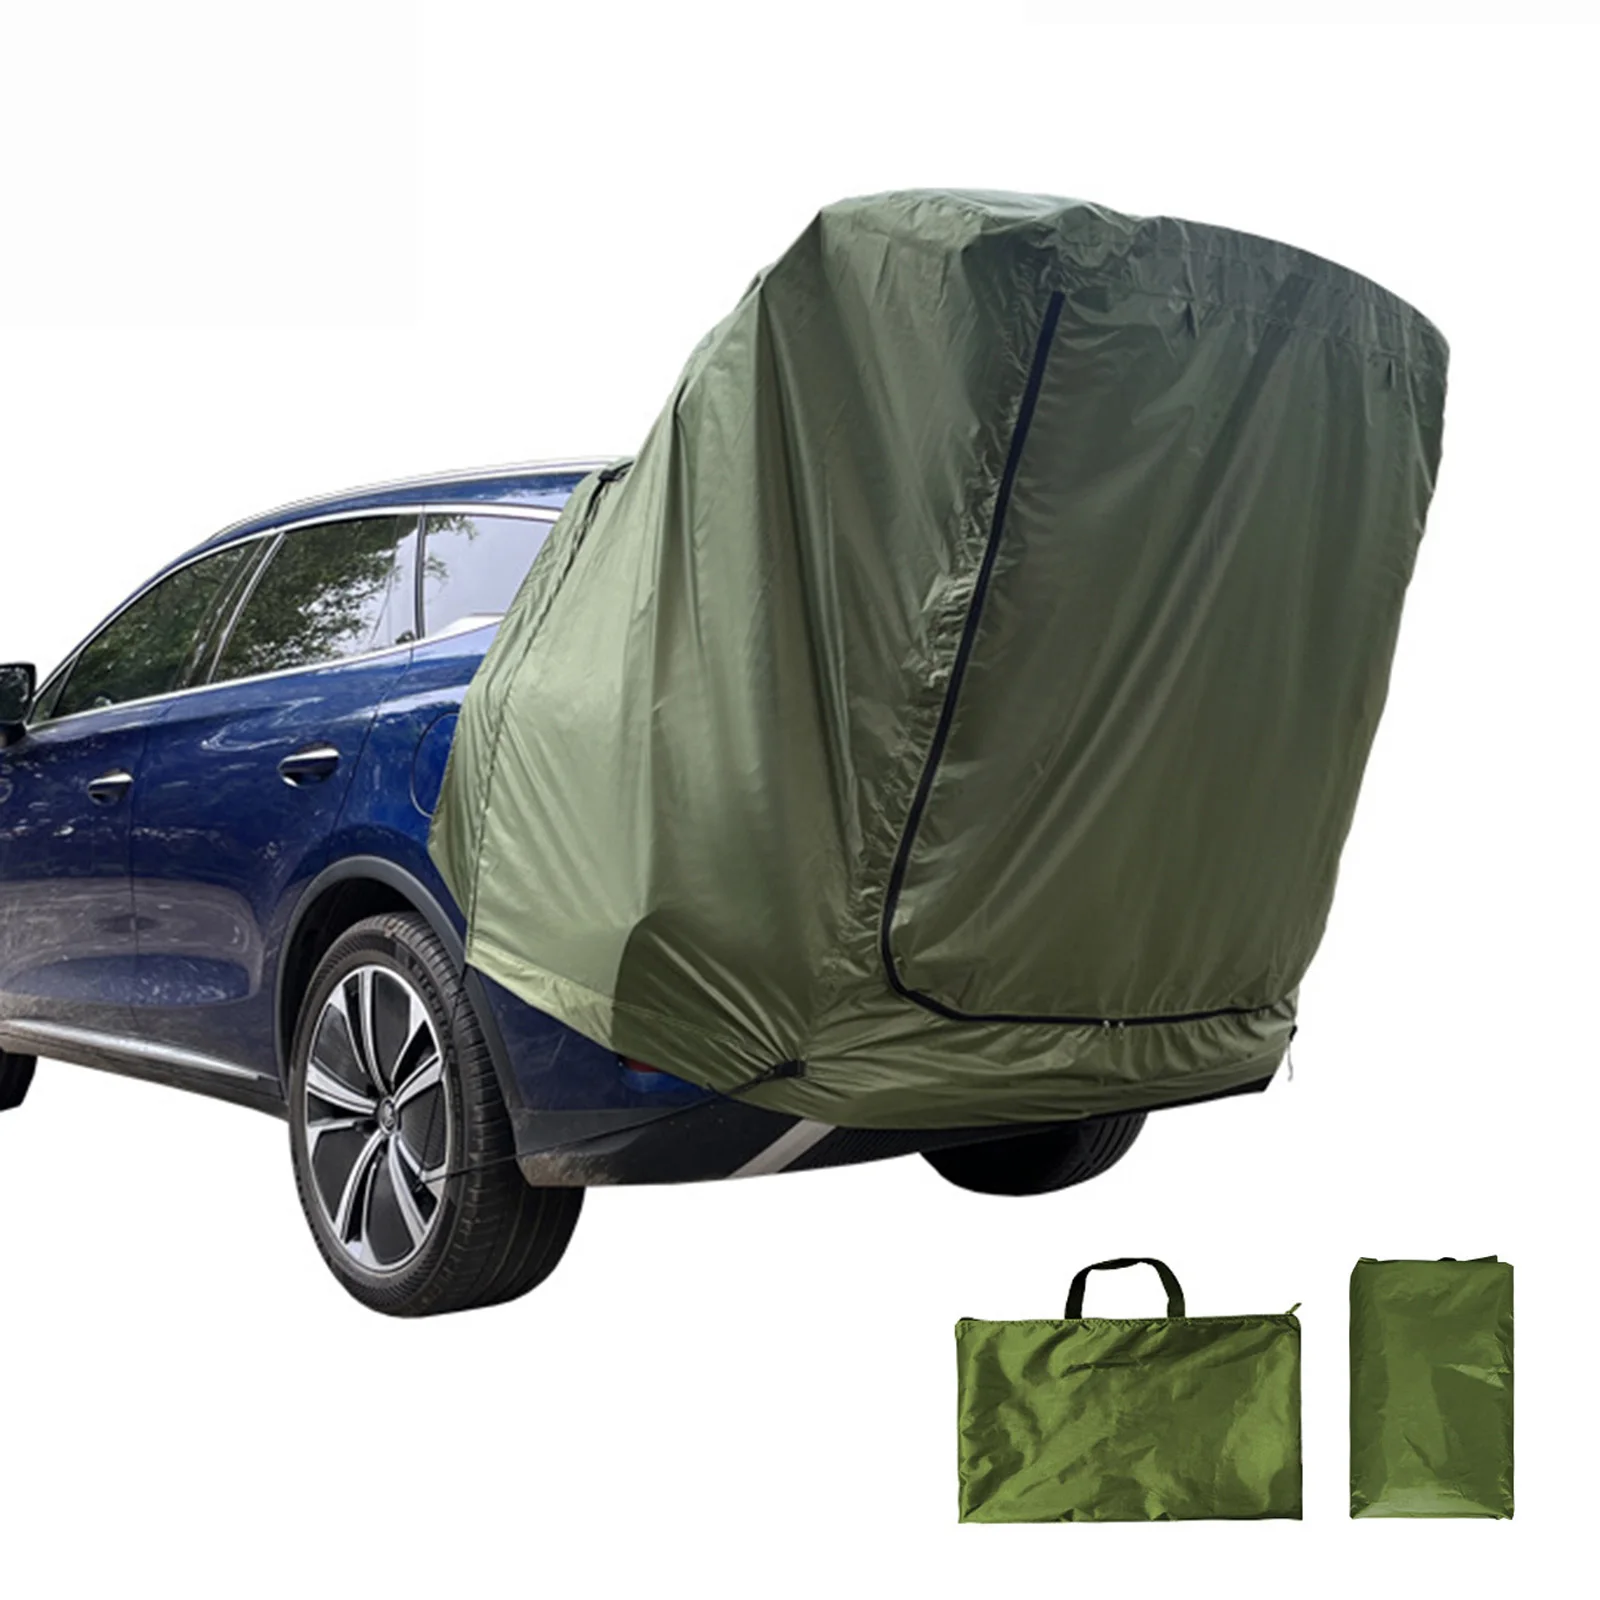 

Durable Outdoor Sports Car Tailgate Tent SUV Rear Tent Shade Tailgate Tent Tents With Awning Attachment Cabana